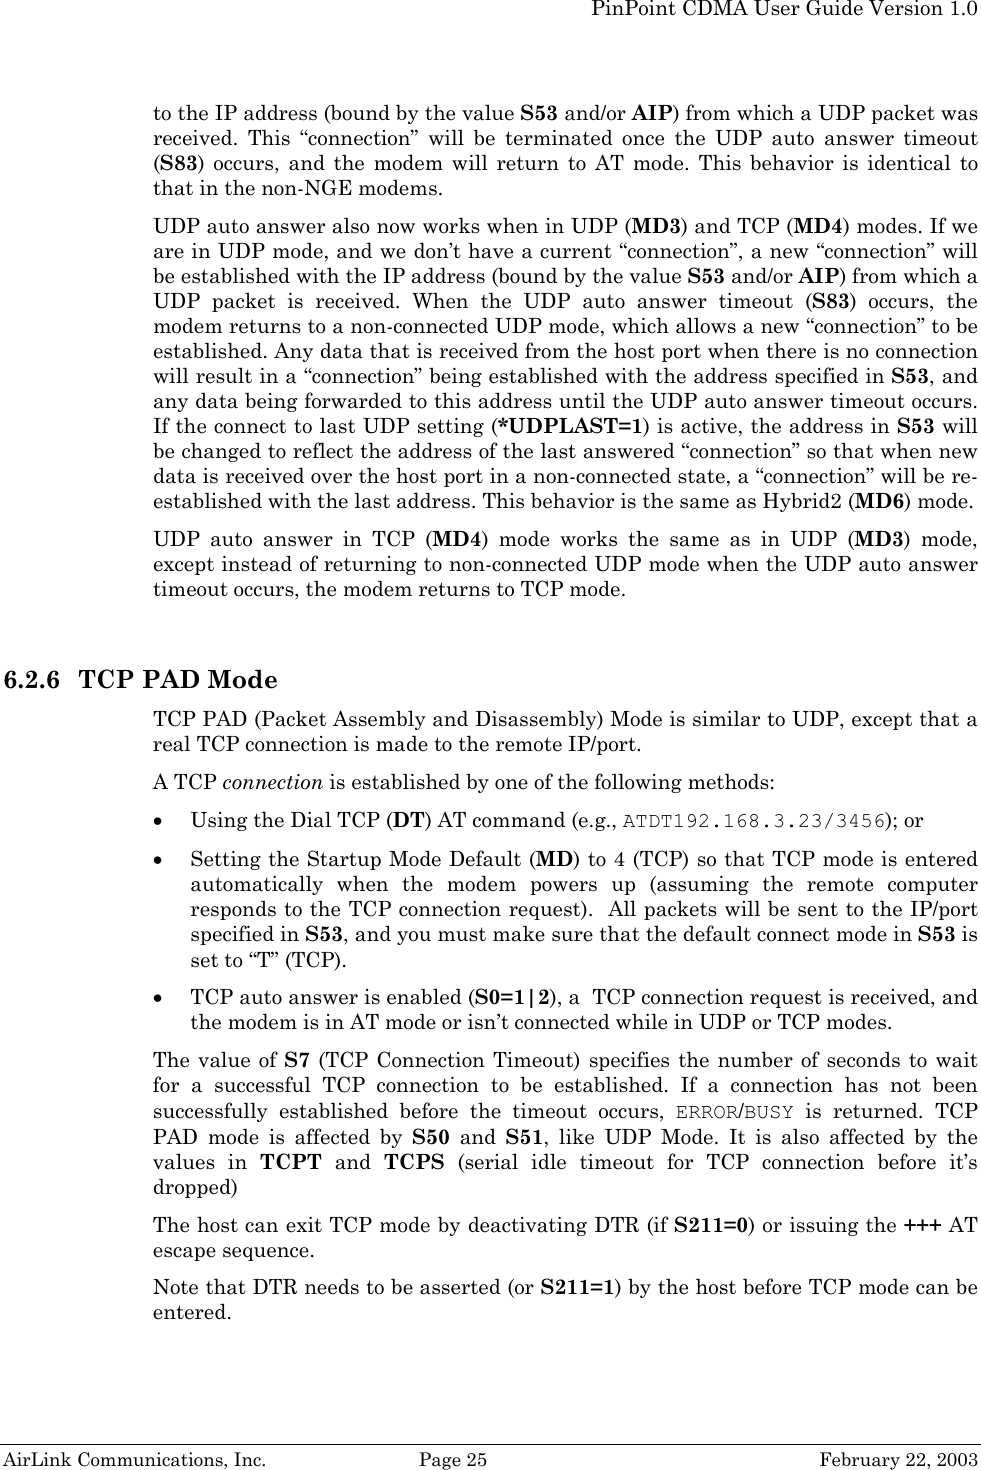   PinPoint CDMA User Guide Version 1.0   AirLink Communications, Inc.  Page 25  February 22, 2003 to the IP address (bound by the value S53 and/or AIP) from which a UDP packet was received. This “connection” will be terminated once the UDP auto answer timeout (S83) occurs, and the modem will return to AT mode. This behavior is identical to that in the non-NGE modems. UDP auto answer also now works when in UDP (MD3) and TCP (MD4) modes. If we are in UDP mode, and we don’t have a current “connection”, a new “connection” will be established with the IP address (bound by the value S53 and/or AIP) from which a UDP packet is received. When the UDP auto answer timeout (S83) occurs, the modem returns to a non-connected UDP mode, which allows a new “connection” to be established. Any data that is received from the host port when there is no connection will result in a “connection” being established with the address specified in S53, and any data being forwarded to this address until the UDP auto answer timeout occurs. If the connect to last UDP setting (*UDPLAST=1) is active, the address in S53 will be changed to reflect the address of the last answered “connection” so that when new data is received over the host port in a non-connected state, a “connection” will be re-established with the last address. This behavior is the same as Hybrid2 (MD6) mode. UDP auto answer in TCP (MD4) mode works the same as in UDP (MD3) mode, except instead of returning to non-connected UDP mode when the UDP auto answer timeout occurs, the modem returns to TCP mode.  6.2.6 TCP PAD Mode TCP PAD (Packet Assembly and Disassembly) Mode is similar to UDP, except that a real TCP connection is made to the remote IP/port. A TCP connection is established by one of the following methods: • Using the Dial TCP (DT) AT command (e.g., ATDT192.168.3.23/3456); or • Setting the Startup Mode Default (MD) to 4 (TCP) so that TCP mode is entered automatically when the modem powers up (assuming the remote computer responds to the TCP connection request).  All packets will be sent to the IP/port specified in S53, and you must make sure that the default connect mode in S53 is set to “T” (TCP). • TCP auto answer is enabled (S0=1|2), a  TCP connection request is received, and the modem is in AT mode or isn’t connected while in UDP or TCP modes. The value of S7 (TCP Connection Timeout) specifies the number of seconds to wait for a successful TCP connection to be established. If a connection has not been successfully established before the timeout occurs, ERROR/BUSY is returned. TCP PAD mode is affected by S50  and  S51, like UDP Mode. It is also affected by the values in TCPT and TCPS (serial idle timeout for TCP connection before it’s dropped) The host can exit TCP mode by deactivating DTR (if S211=0) or issuing the +++ AT escape sequence. Note that DTR needs to be asserted (or S211=1) by the host before TCP mode can be entered. 